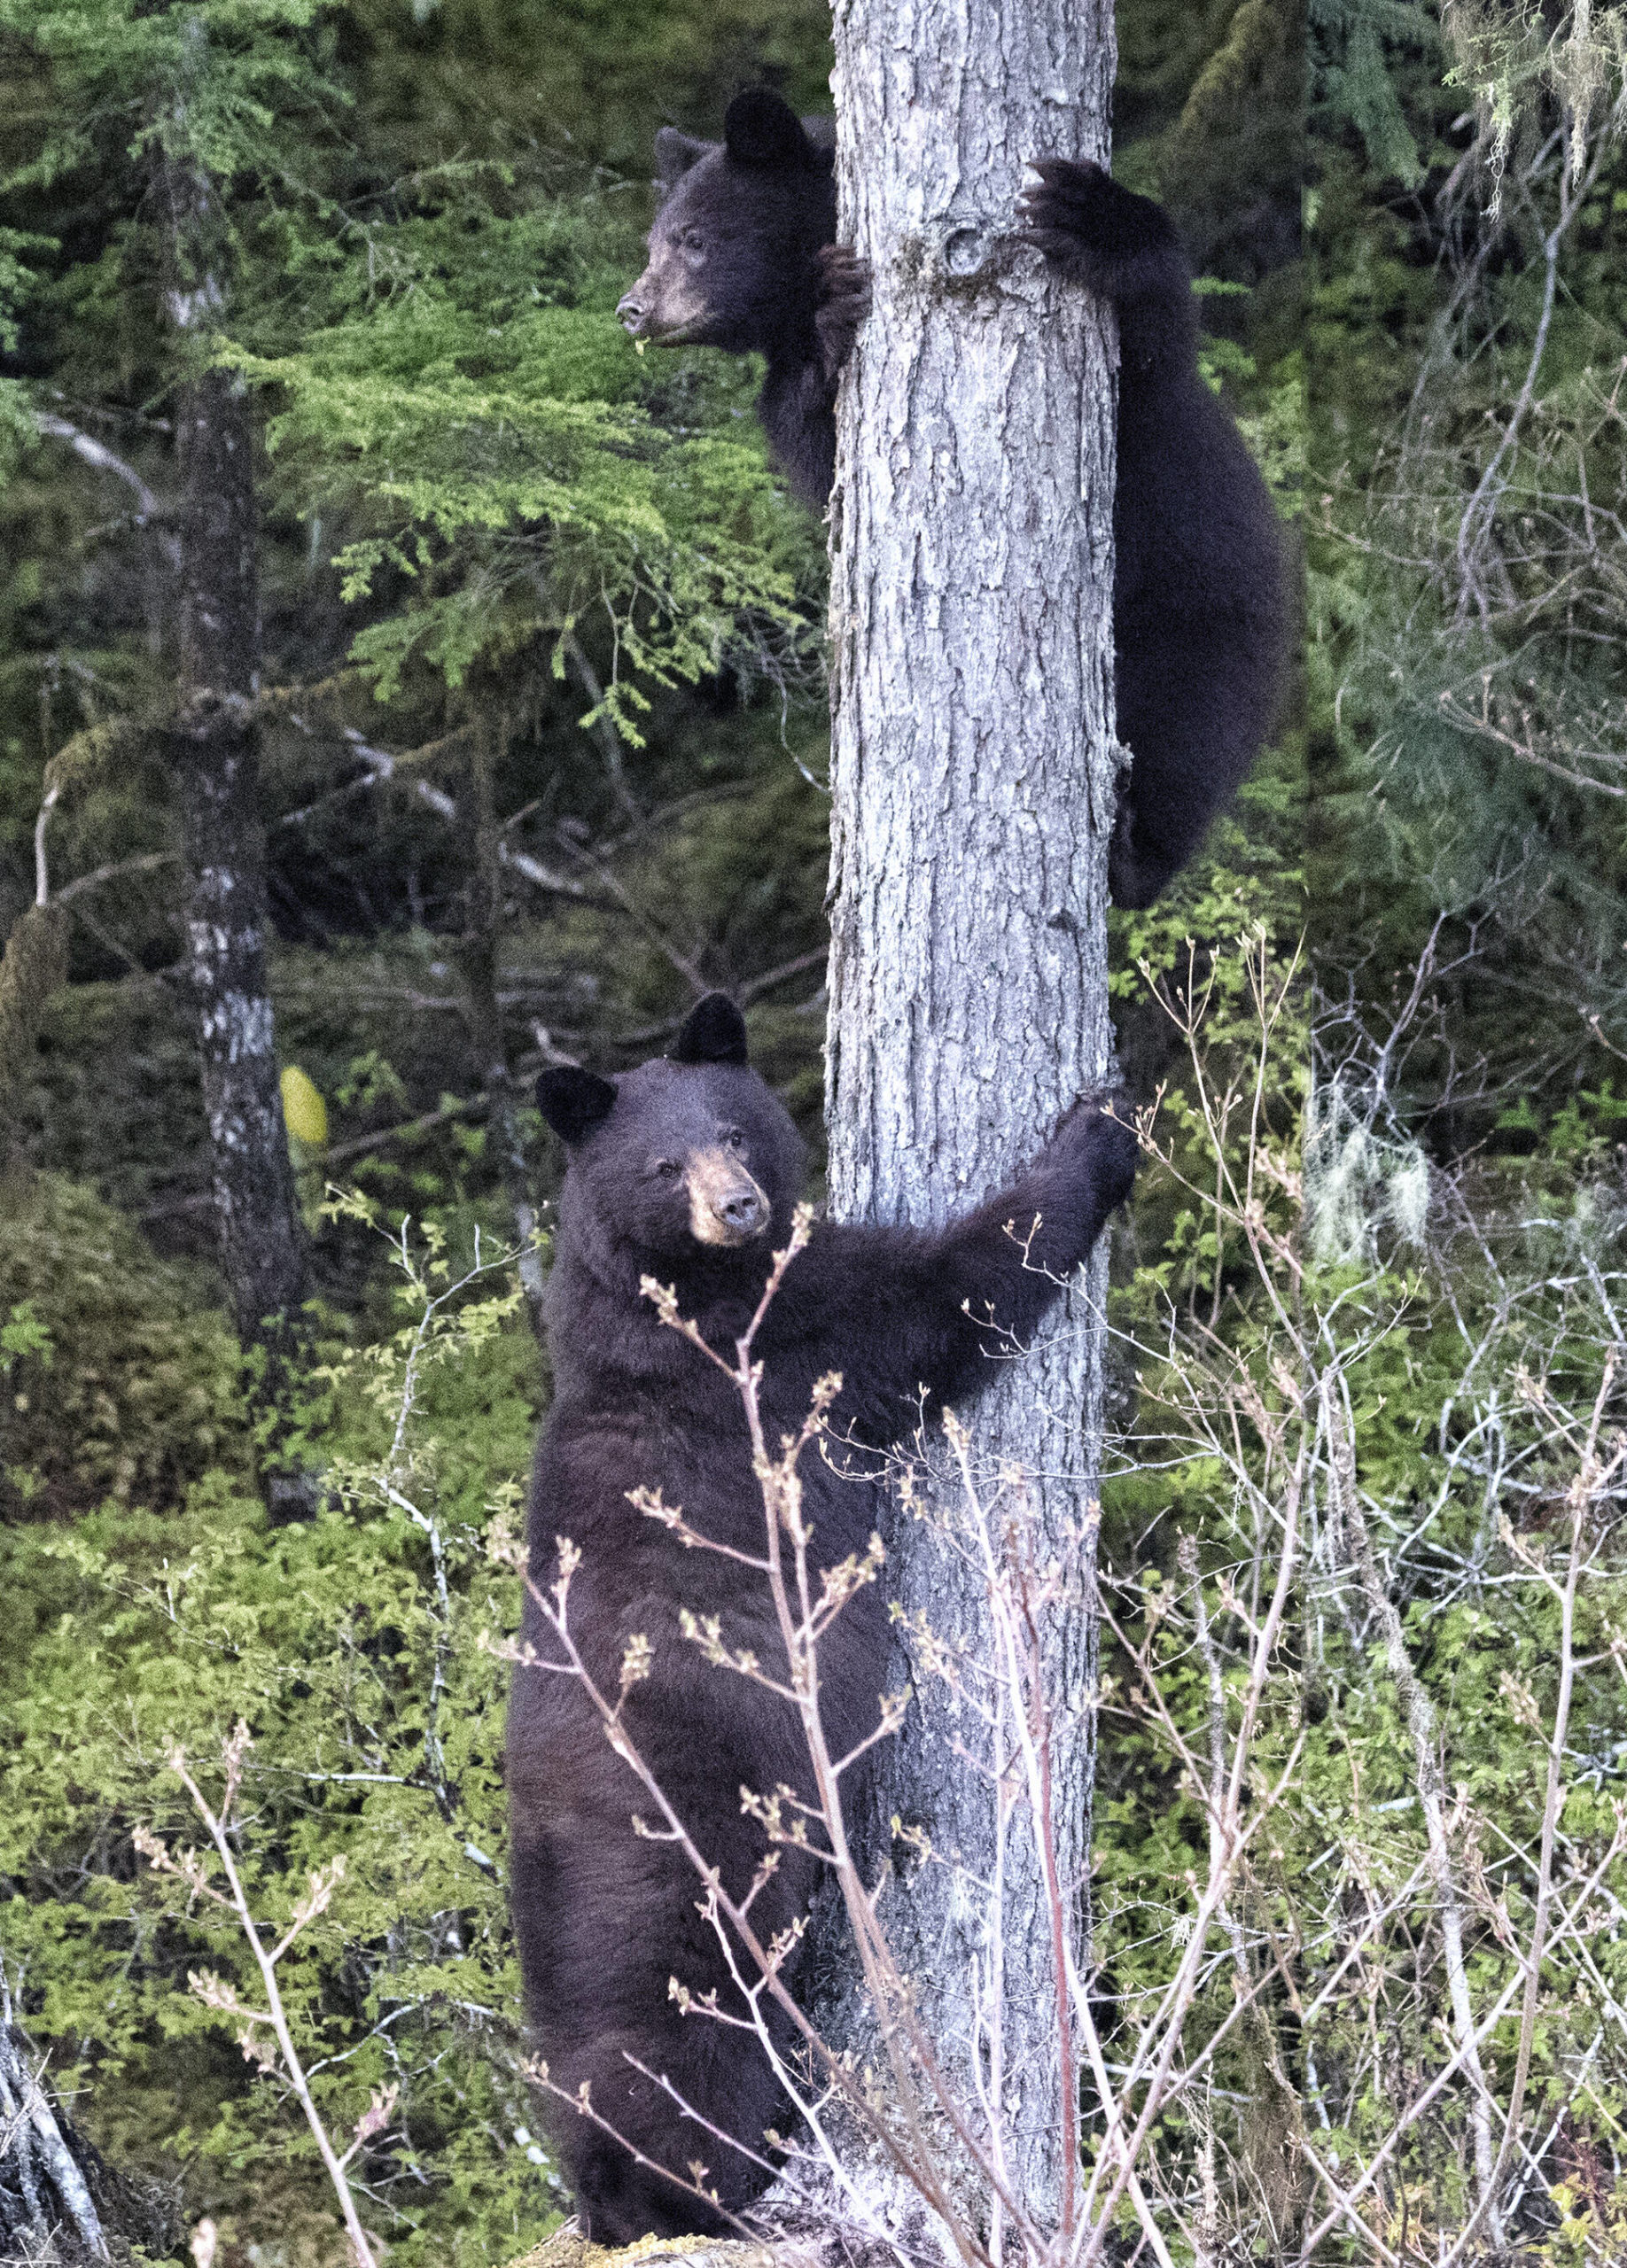 Black bear mother and cub seek refuge up a tree, Out the Road. (Courtesy Photo / Kenneth Gill, gillfoto)
Black bear mother and cub seek refuge up a tree, Out the Road. (Courtesy Photo / Kenneth Gill, gillfoto)